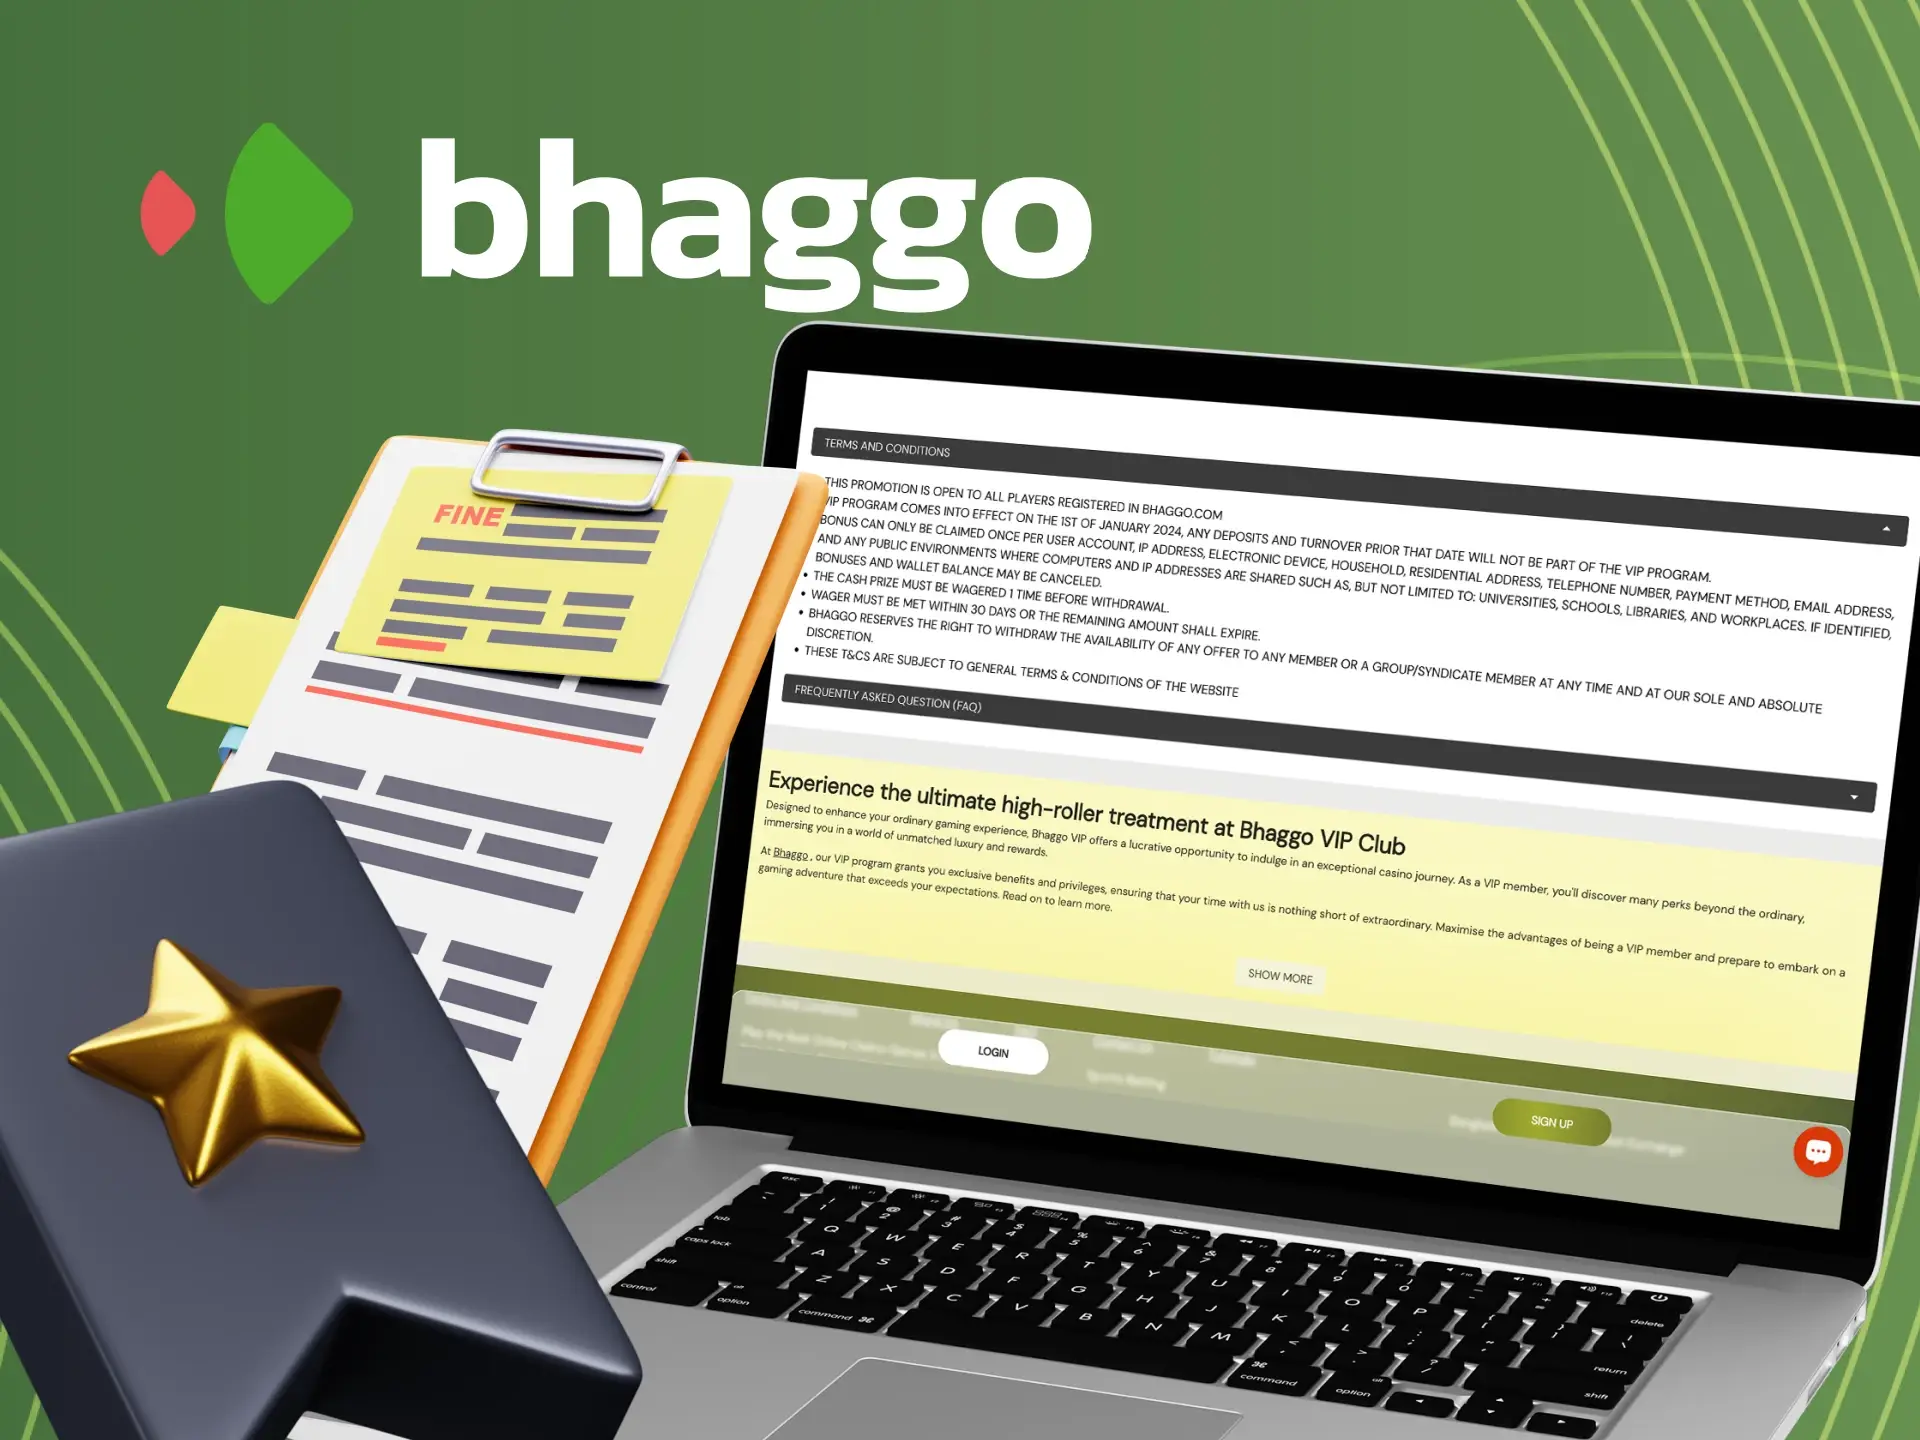 Main terms and conditions of Bhaggo VIP program.